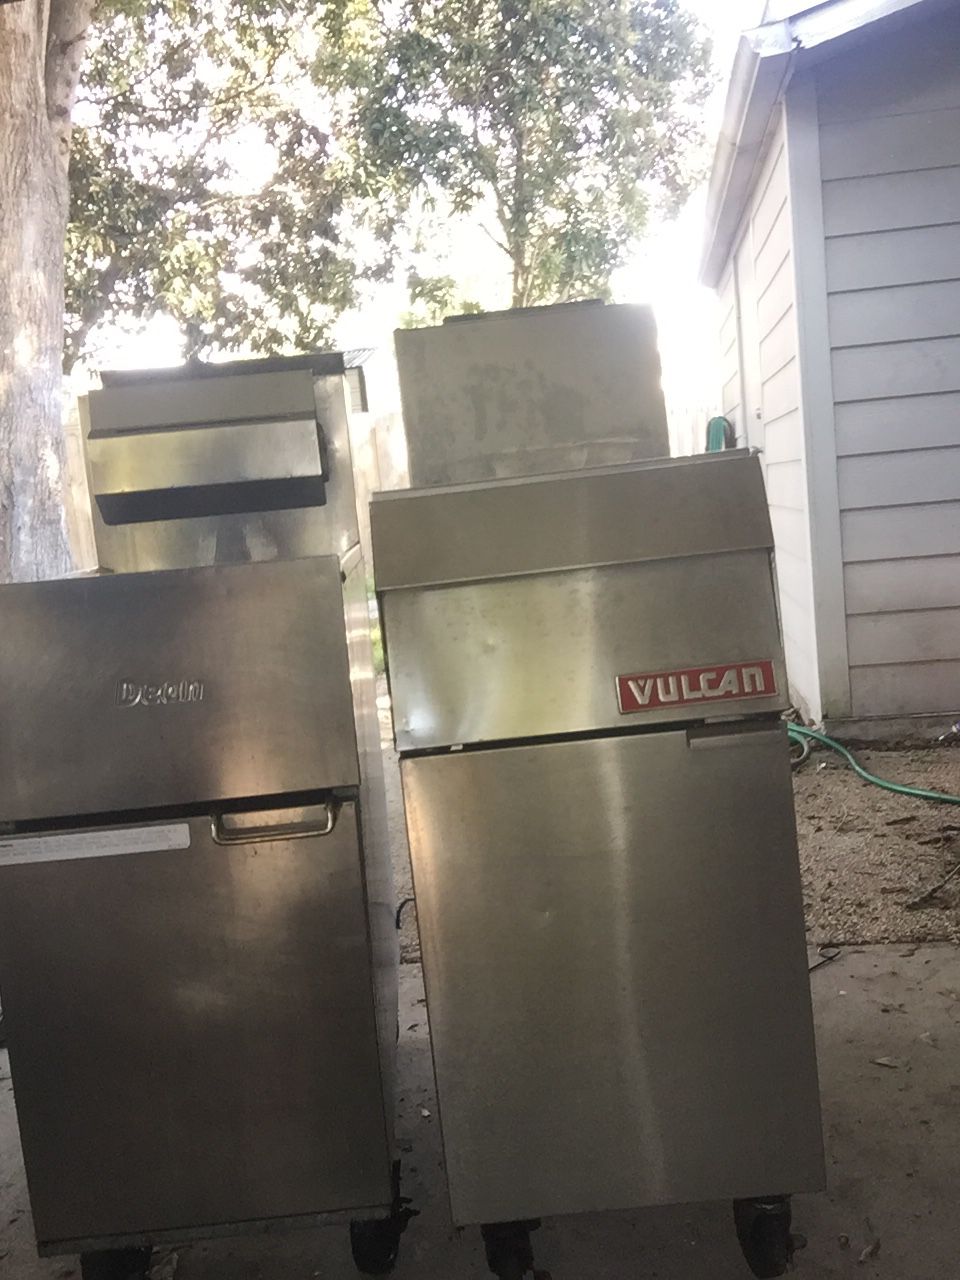 Commercial deep fryers for sale